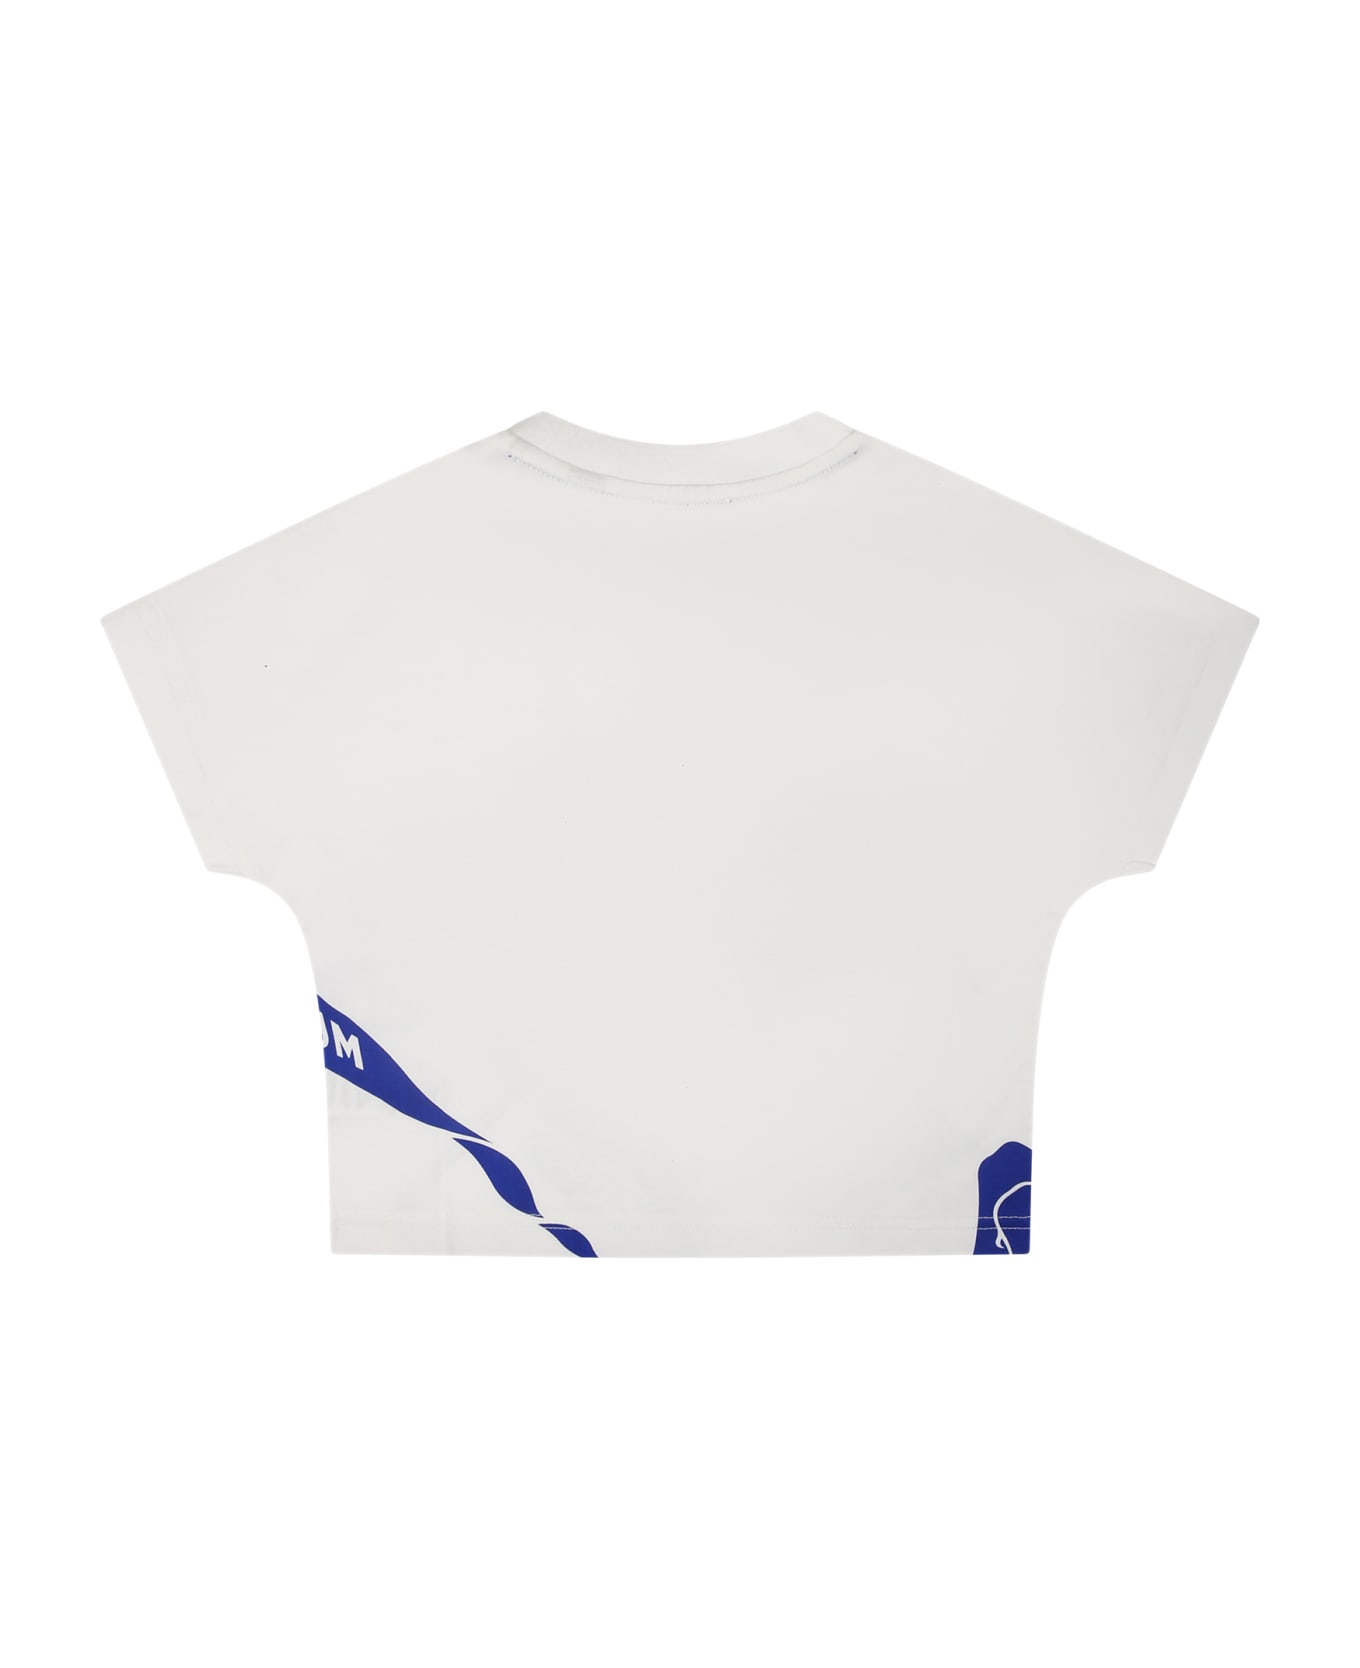 Burberry White T-shirt For Baby Girl With Print